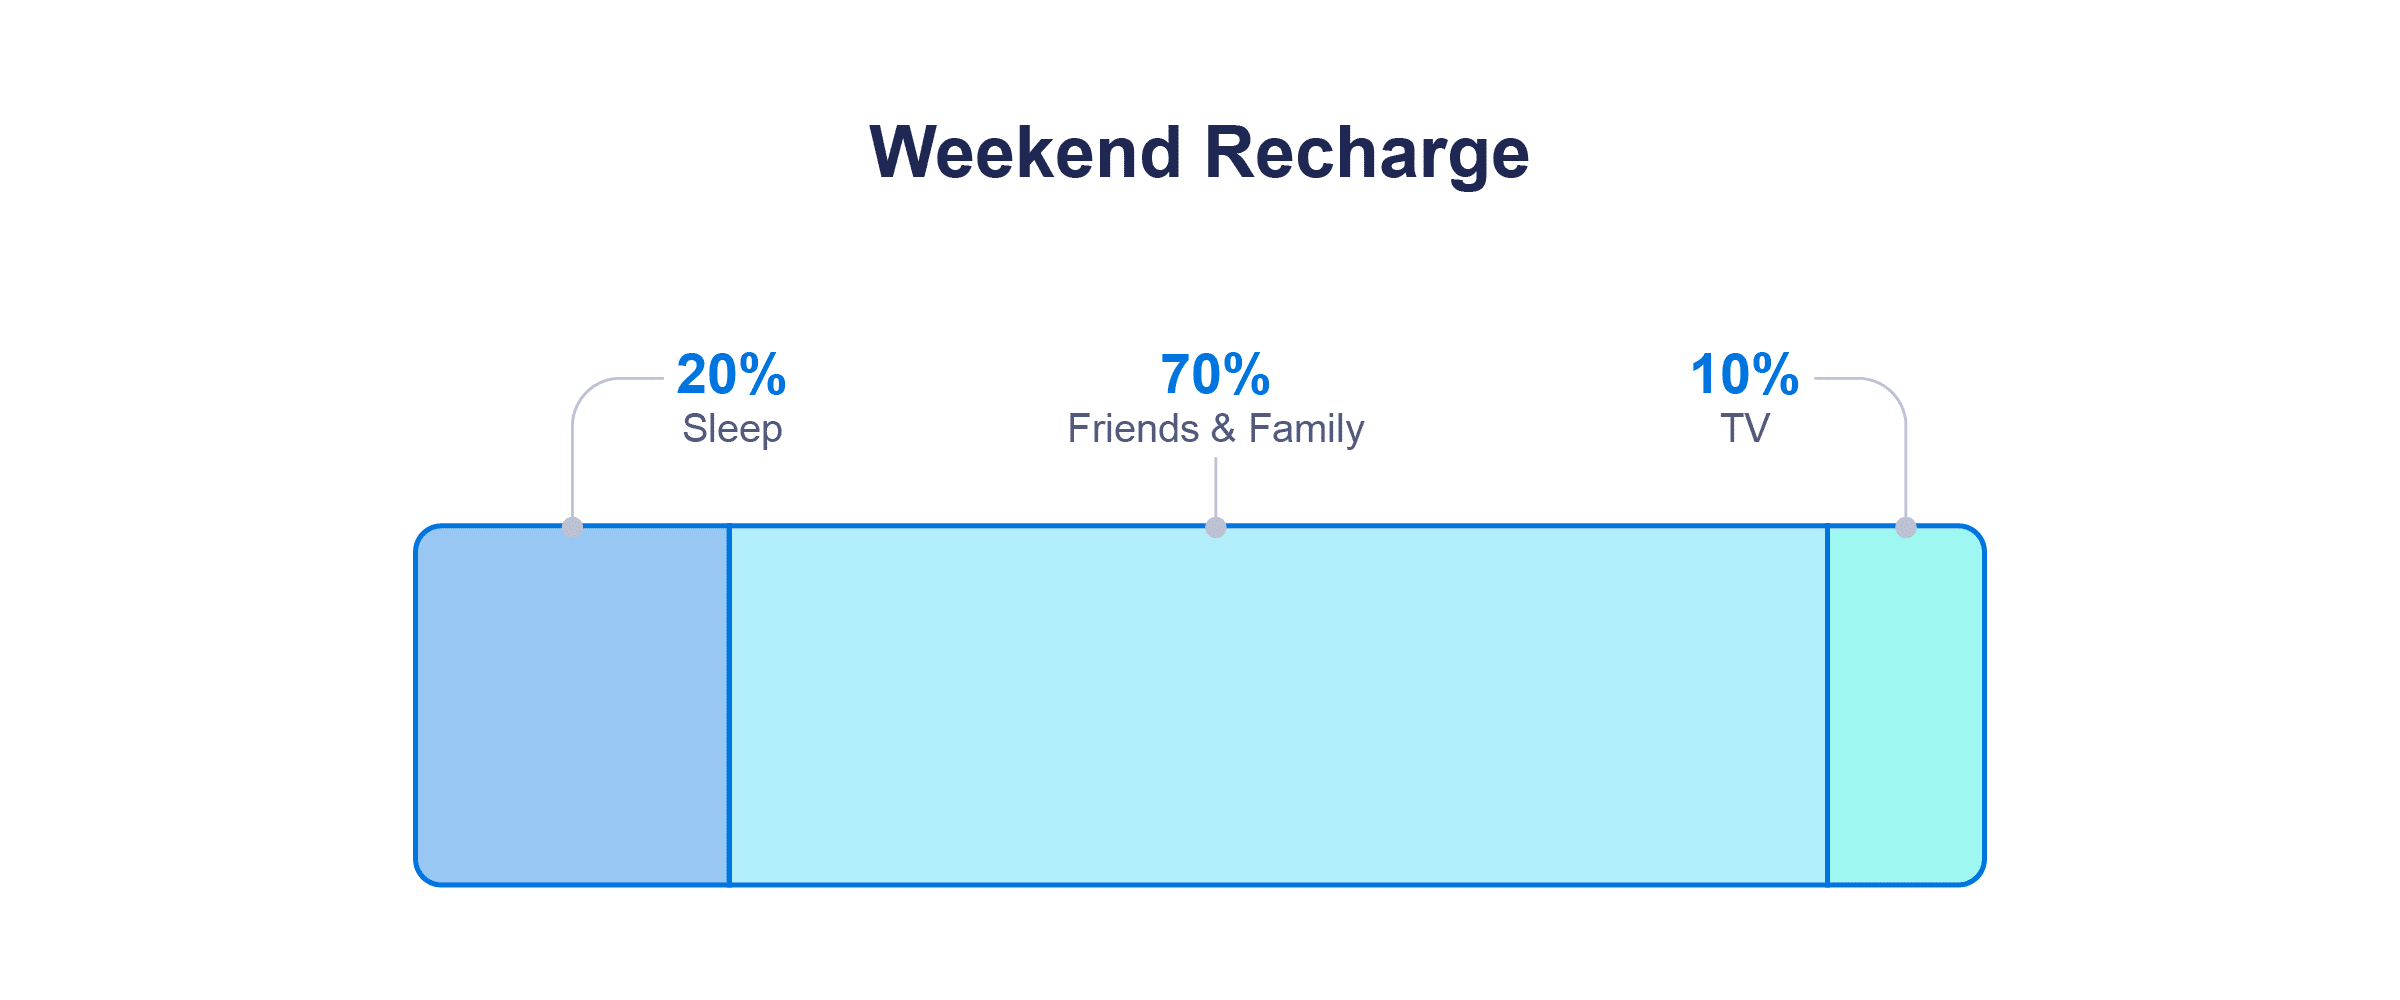 Image showing Brian Garcia's weekend recharge chart: 20% sleep, 70% family, and 10% TV